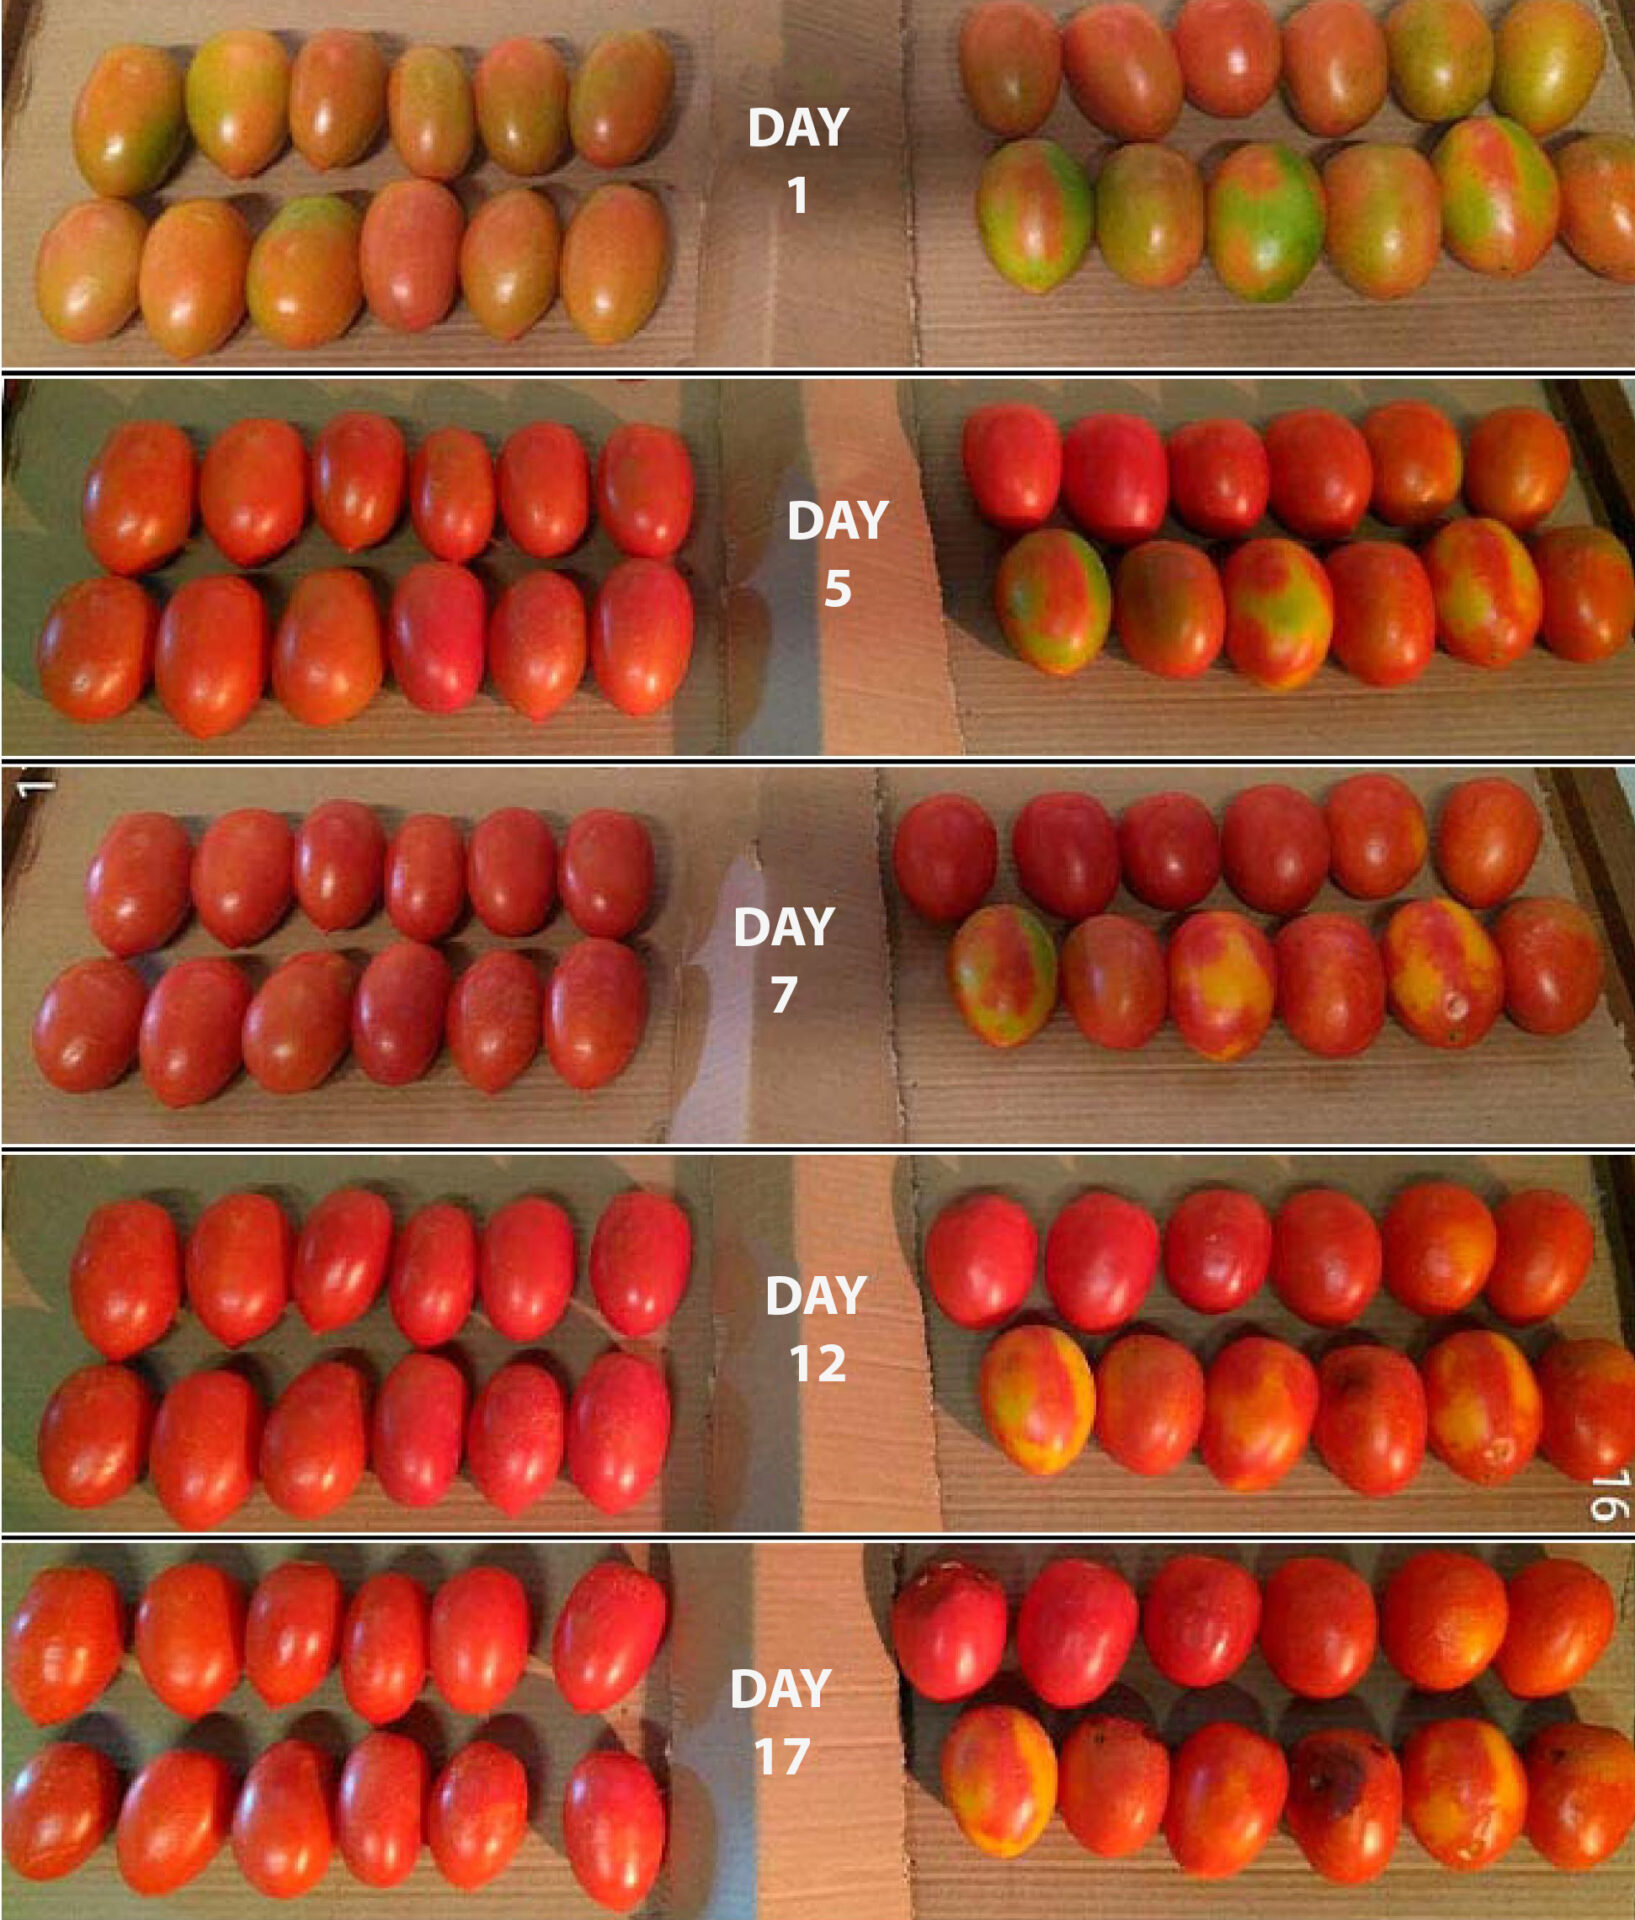 Report Test of Maturation in Pear Tomato With Rebound